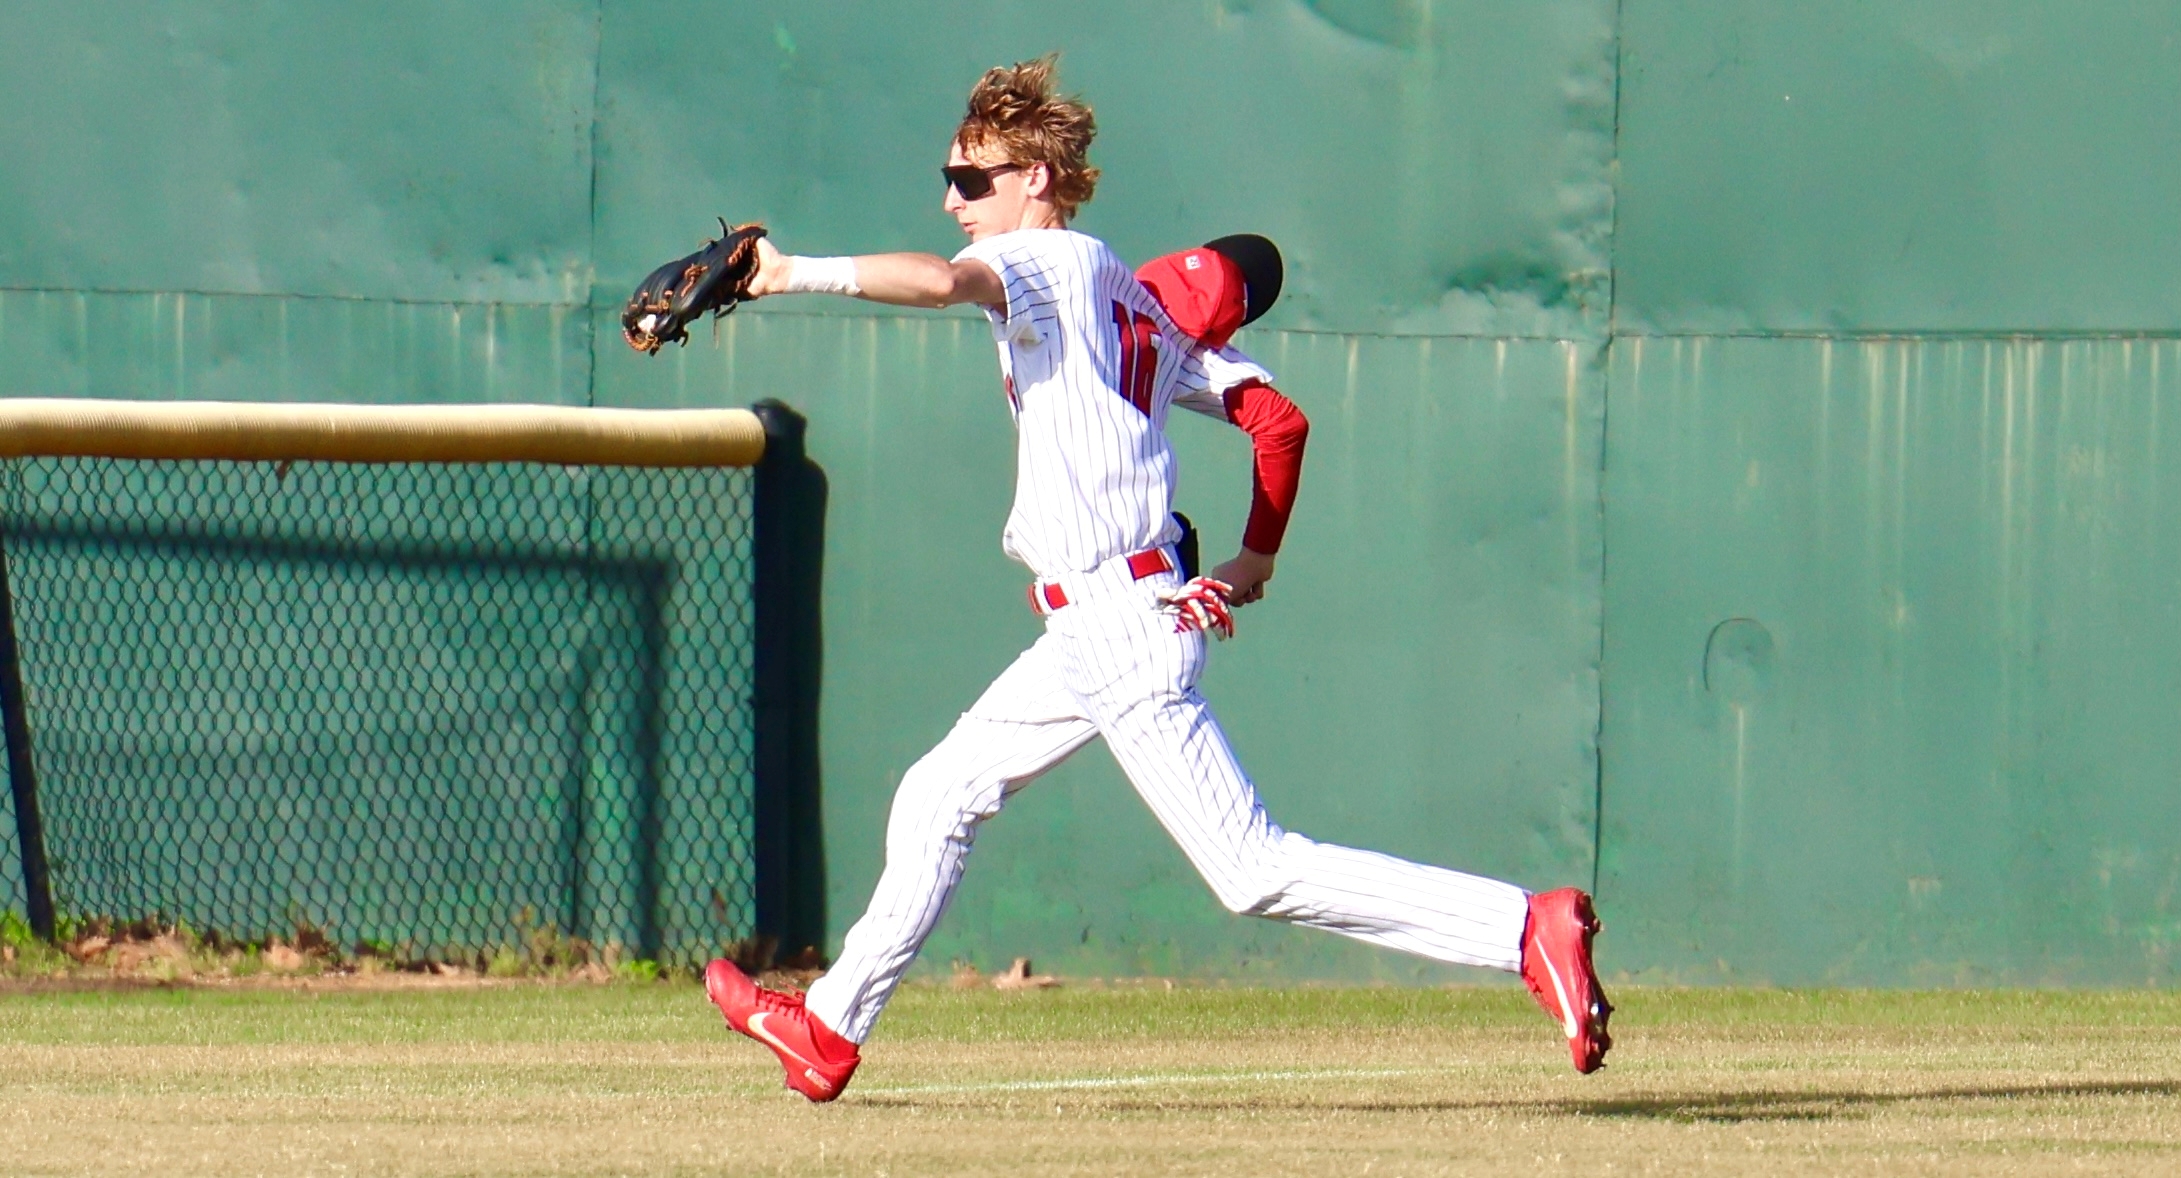 Kilgore outfielder Cason Edney makes a running catch in left field in a playoff game against Bullard. Edney was named the newcomer of the year as a part of District 17-4A's All-District Team. (Photo by DENNIS JACOBS - ETBLITZ.COM)